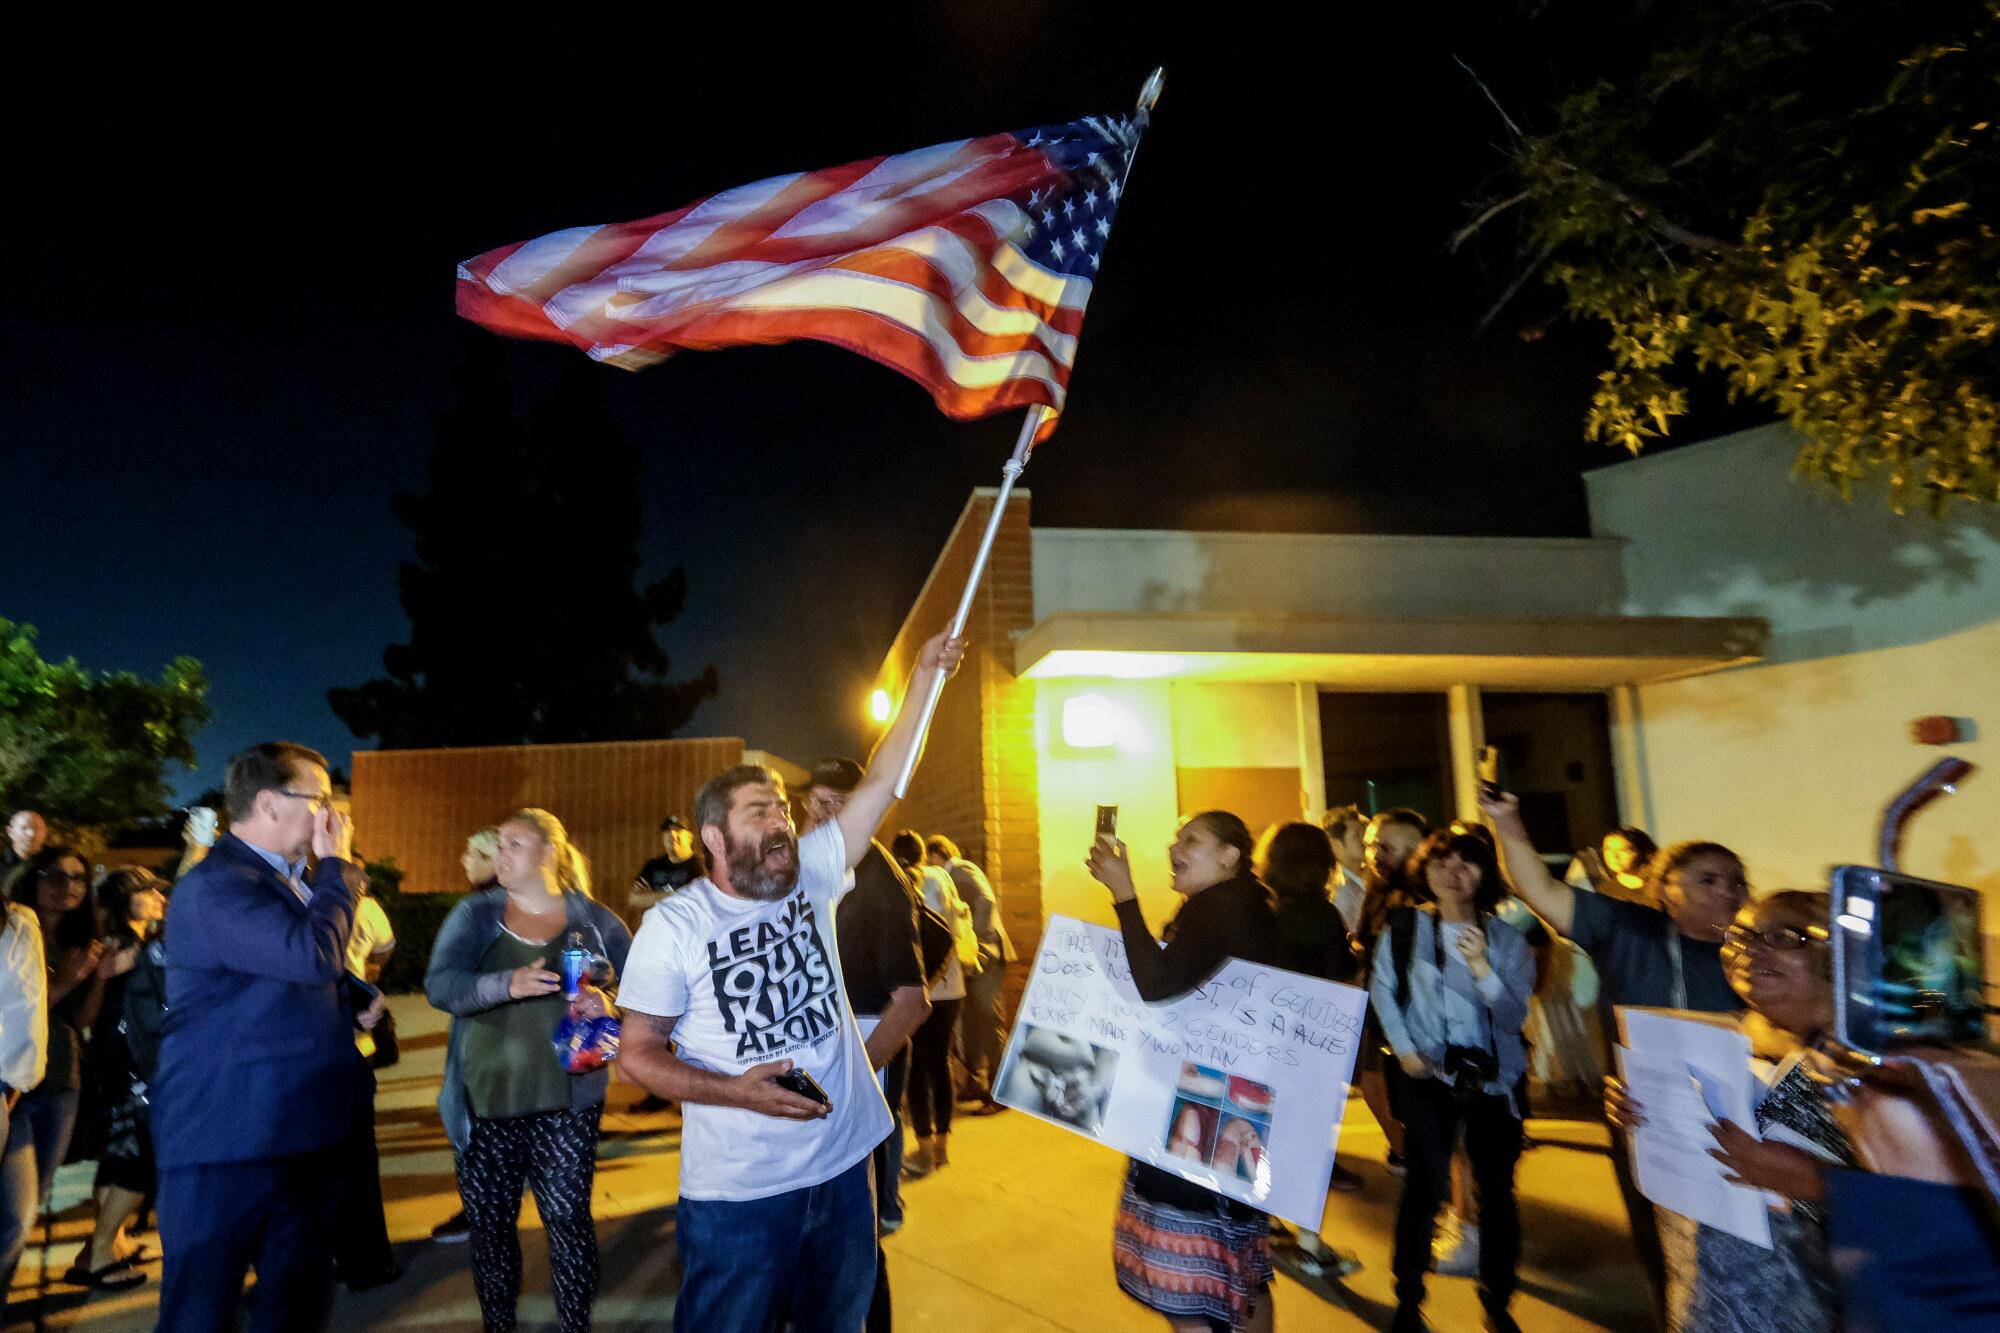 A man waves an American flag outside a building as others stand, some with phones raised.